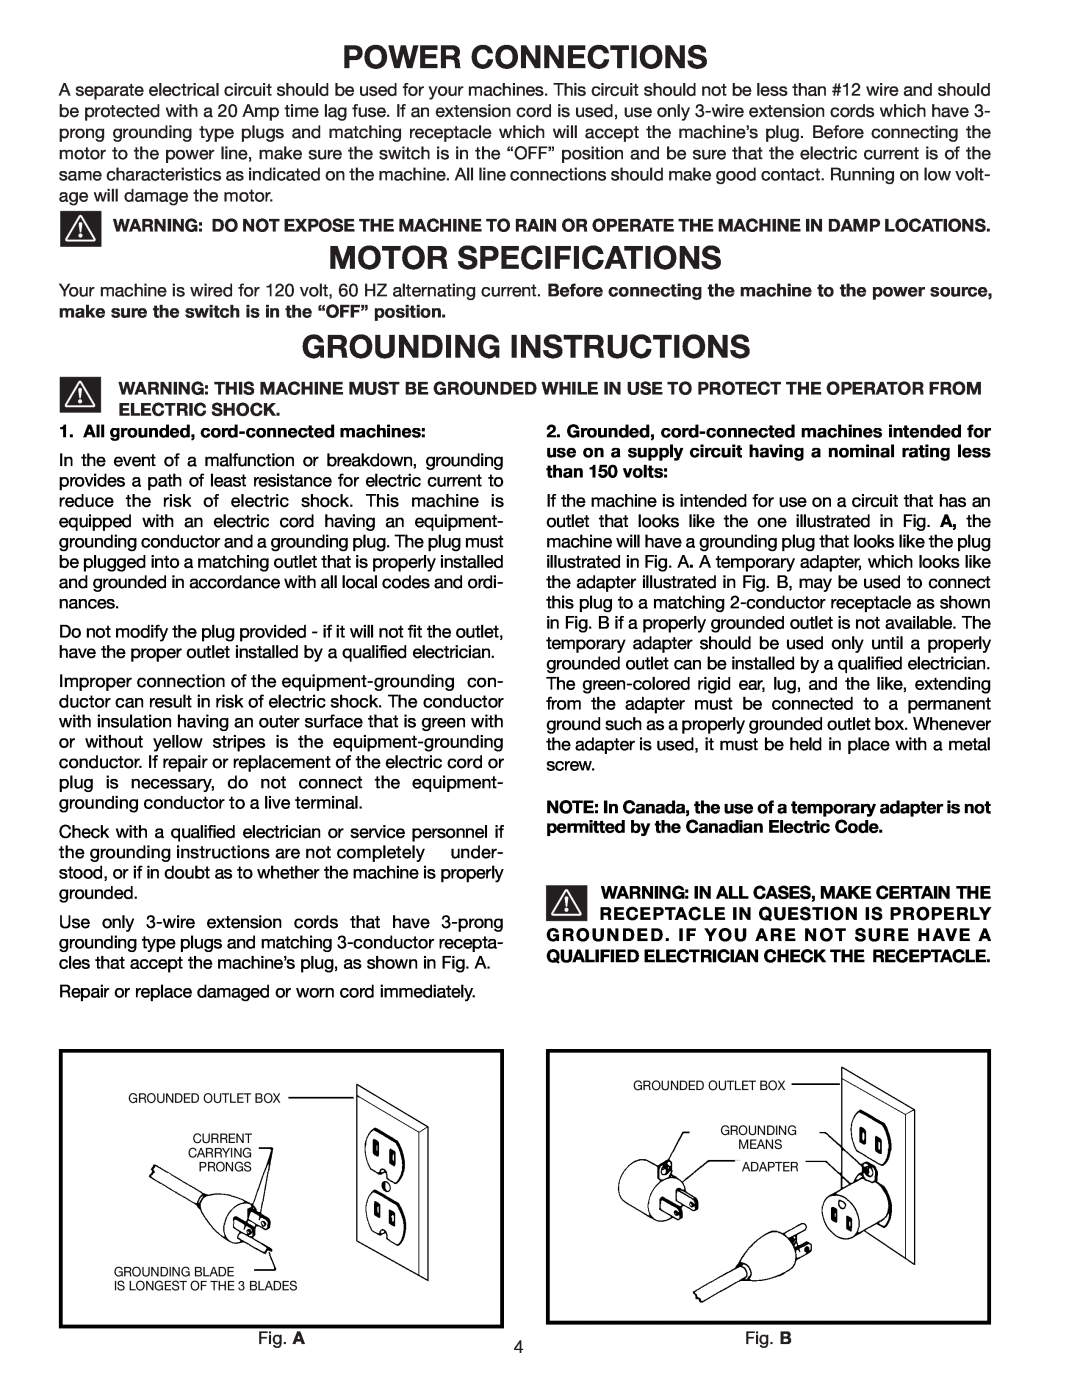 Delta 28-299A Power Connections, Motor Specifications, Grounding Instructions, All grounded, cord-connected machines 